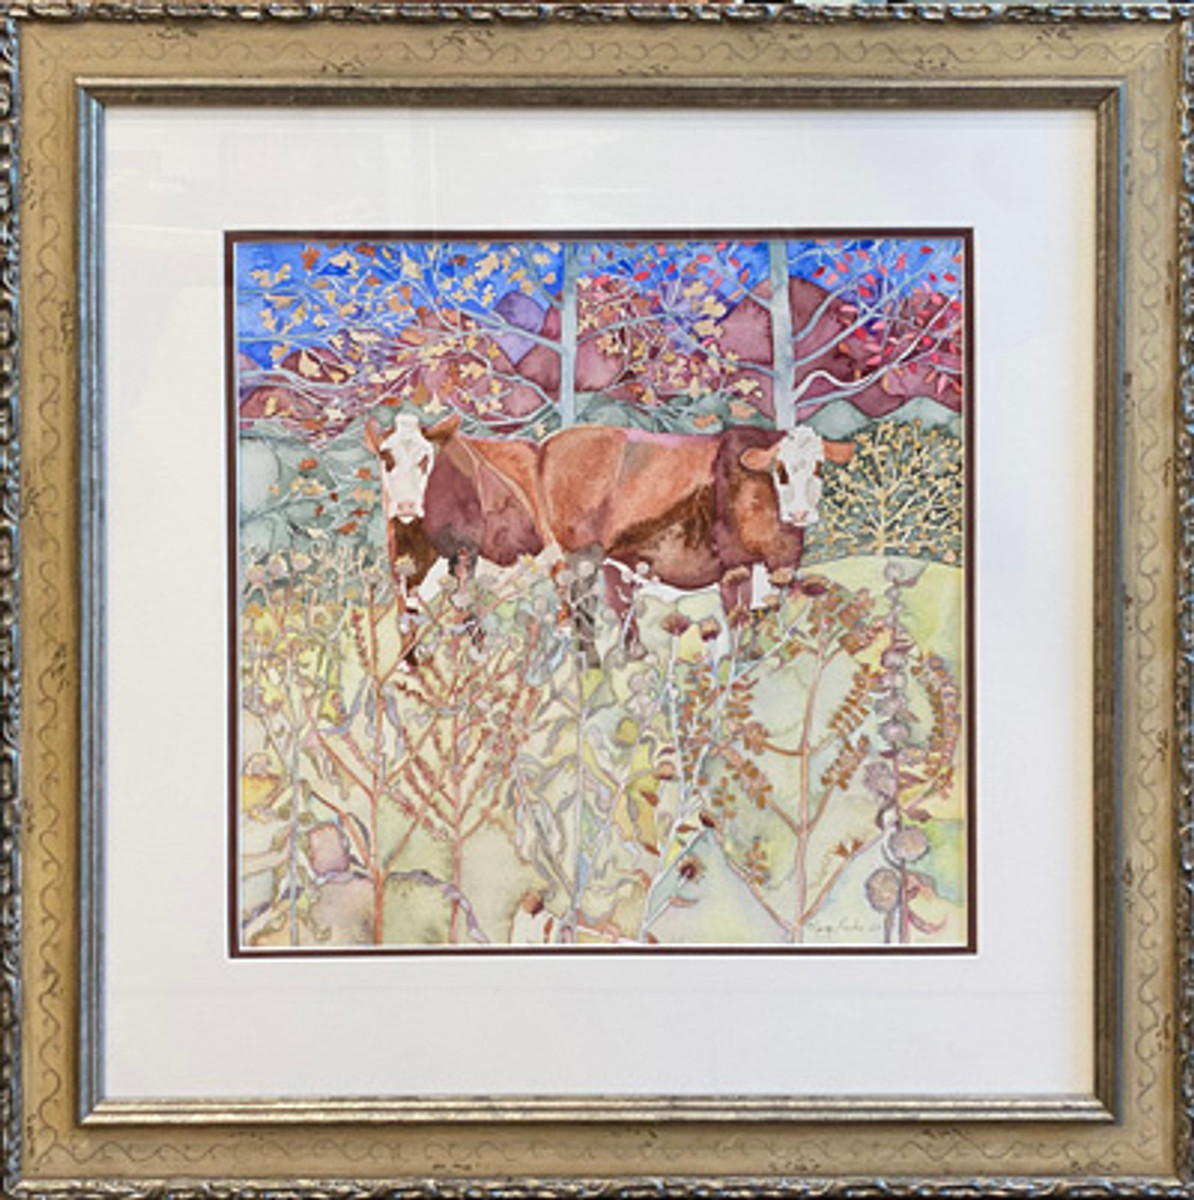 Cows Bordered by Dried Wildflowers